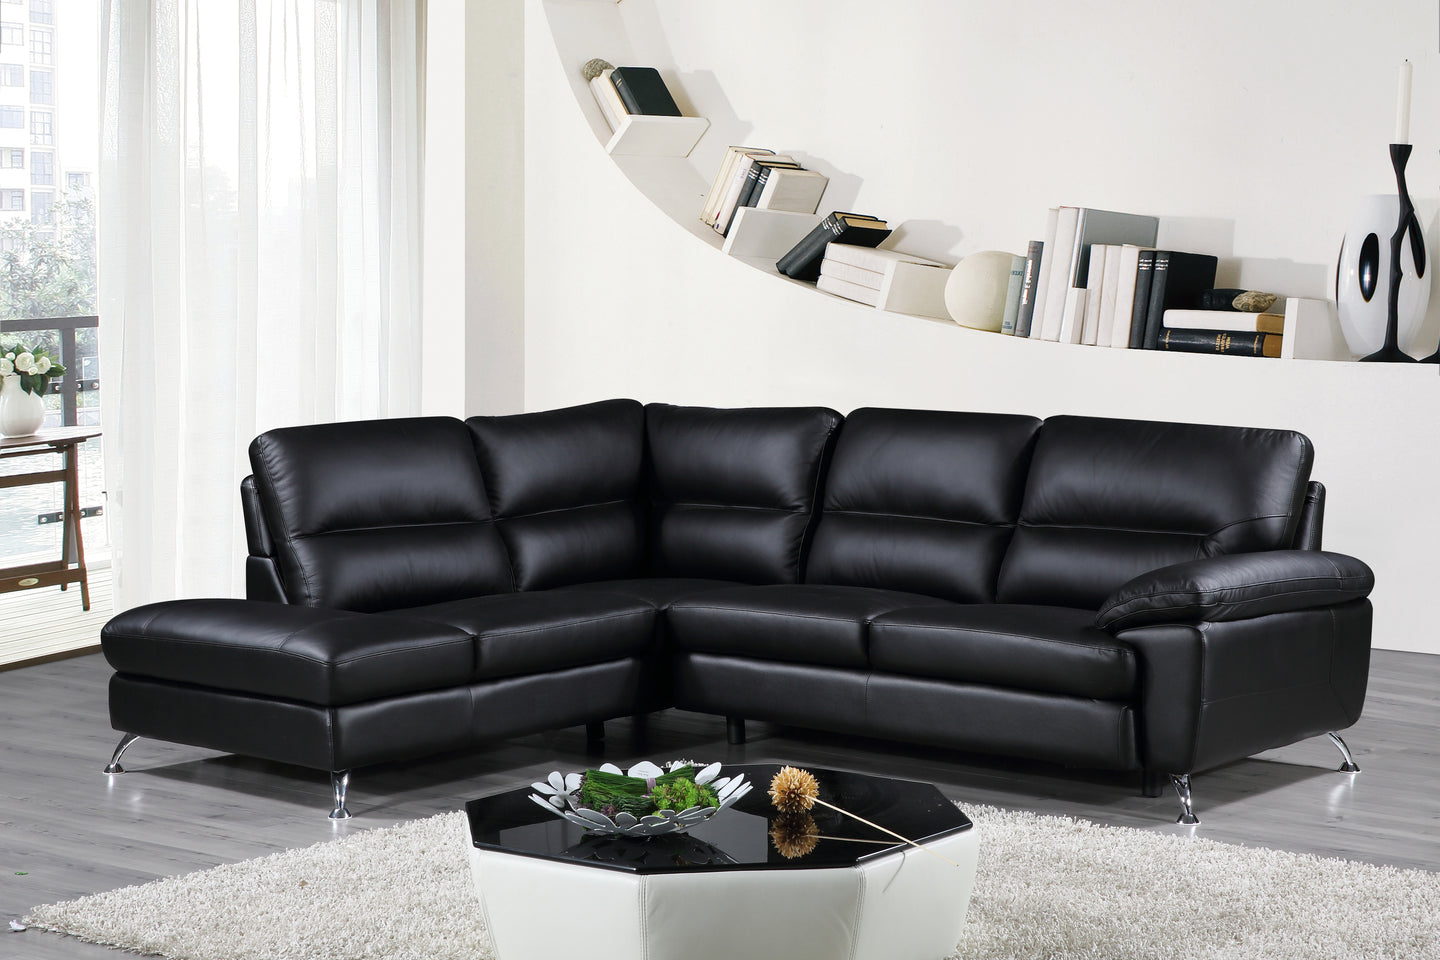 Cortesi Home Contemporary Boston Genuine Leather Sectional Sofa with Left Chaise Lounge, Black 80